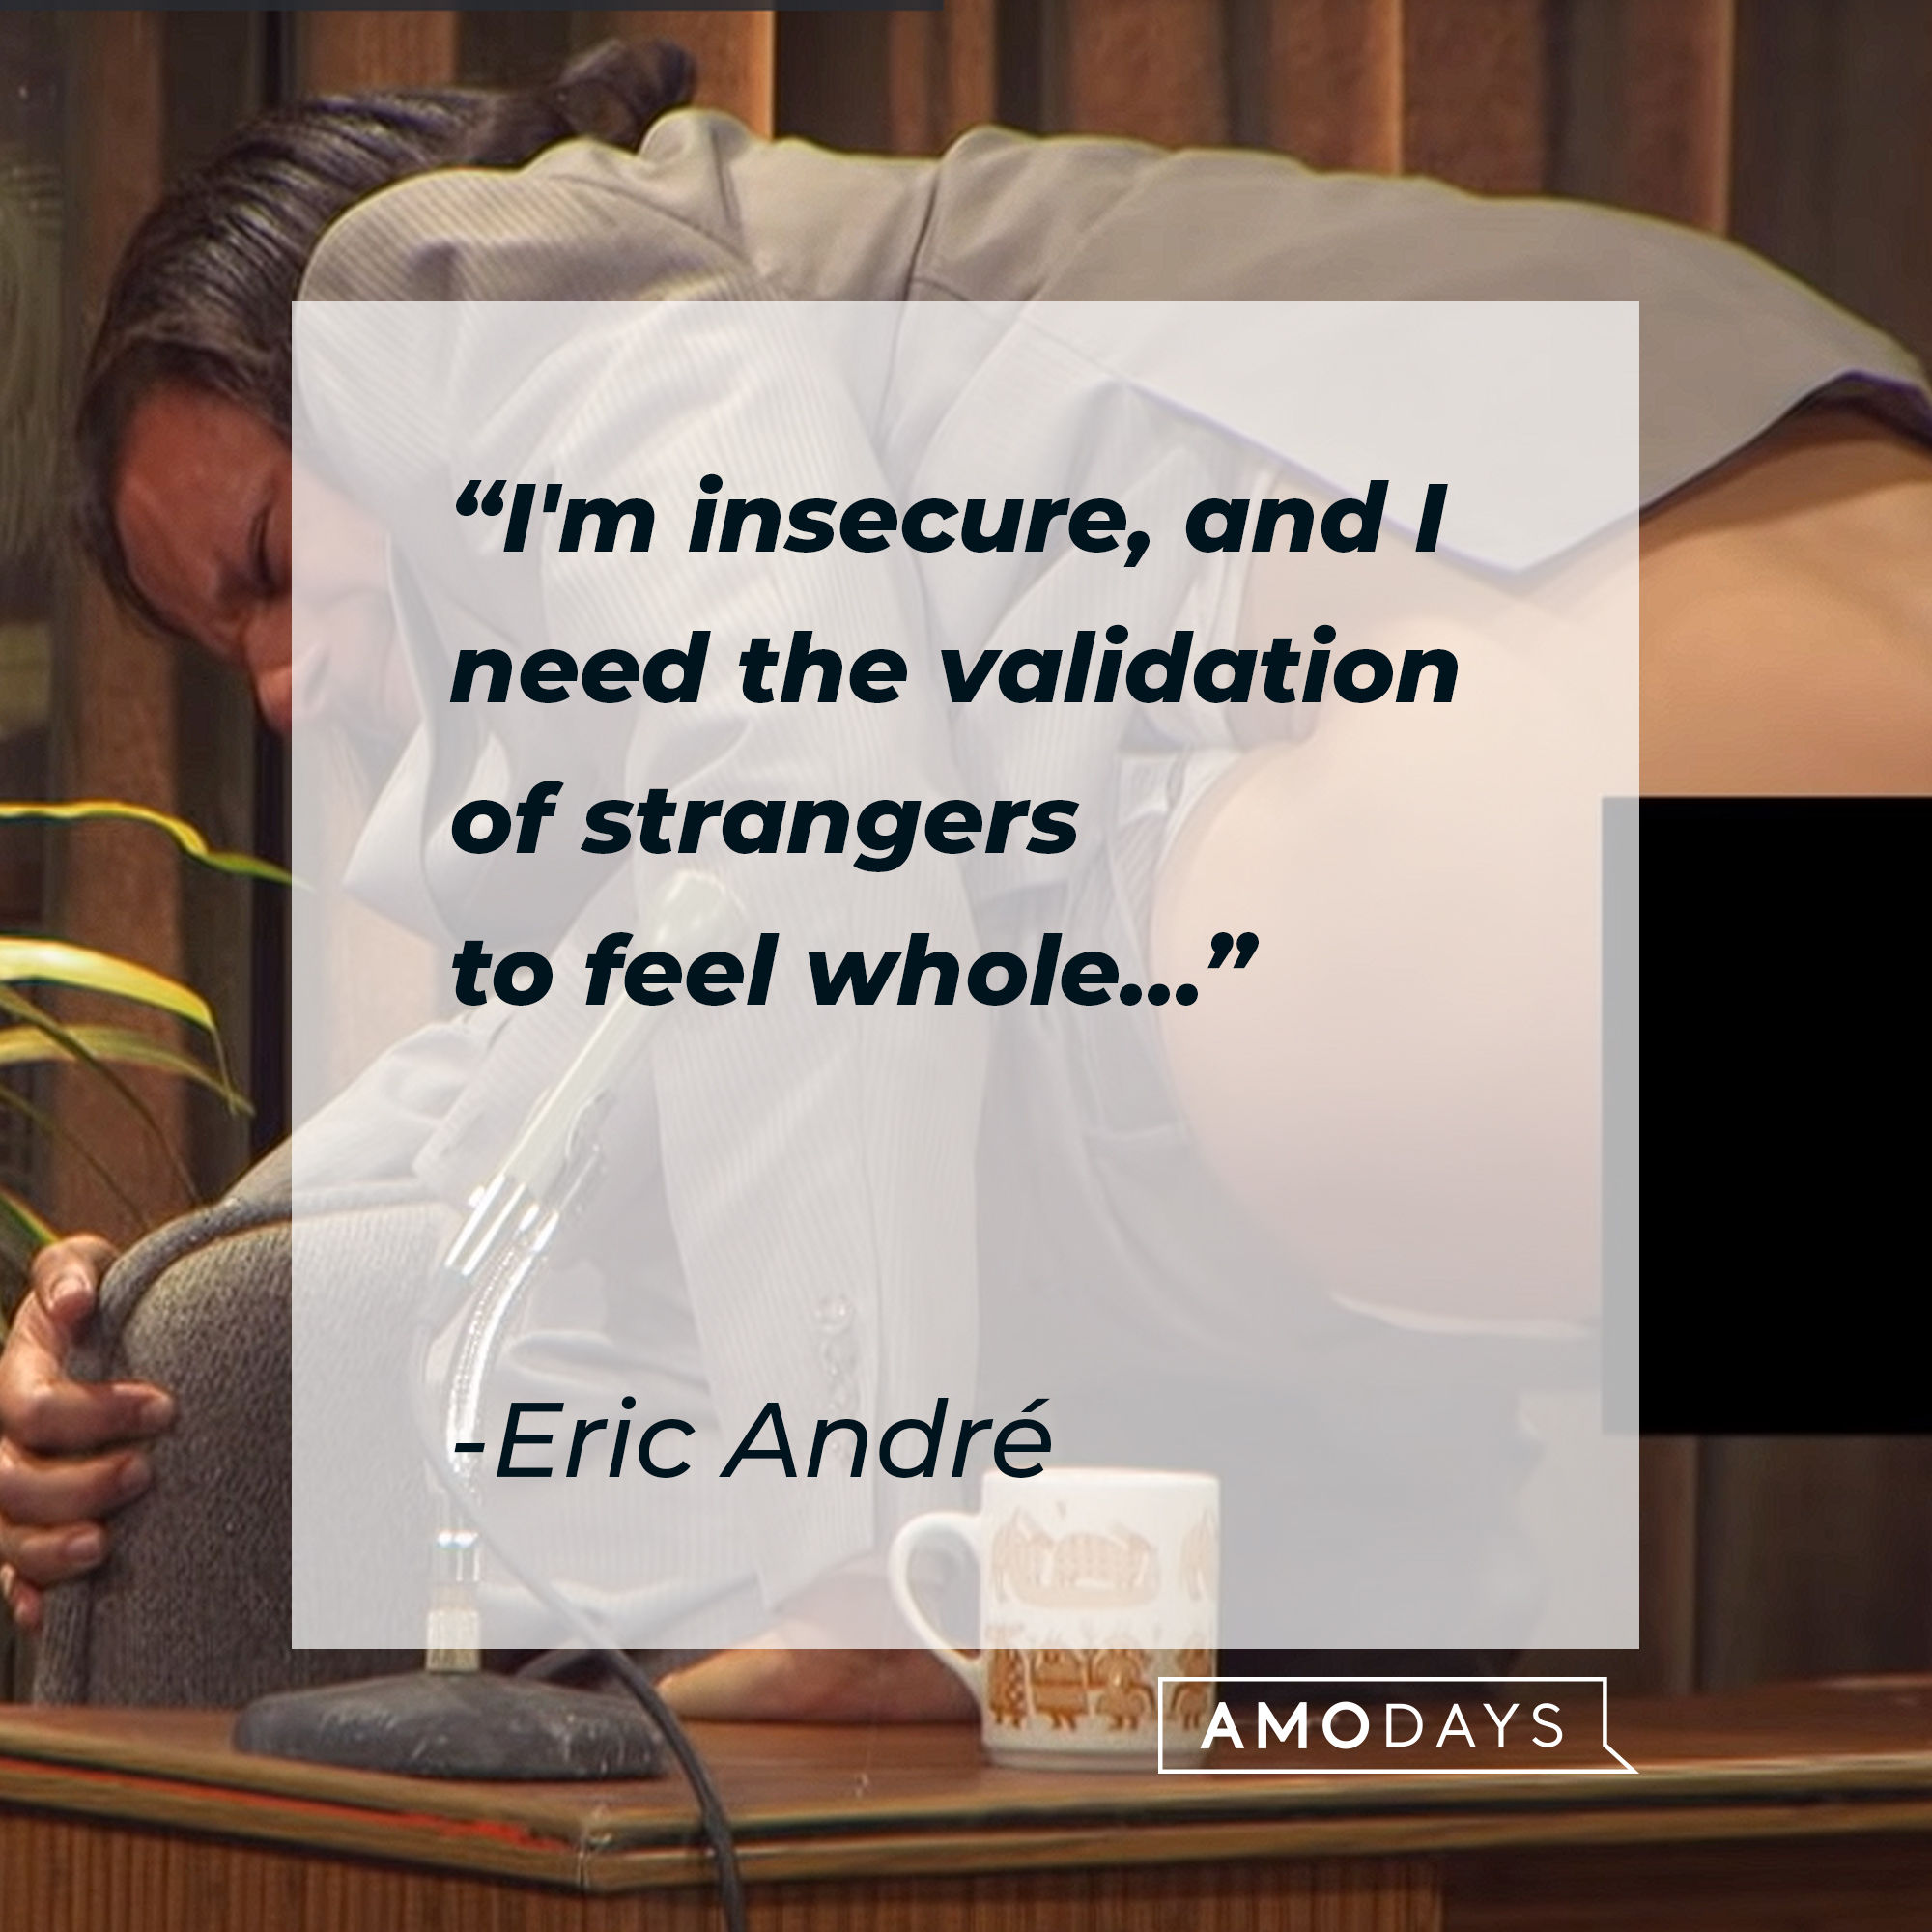 Eric André's quote: "I'm insecure, and I need the validation of strangers to feel whole…" | Source: Youtube.com/adultswim